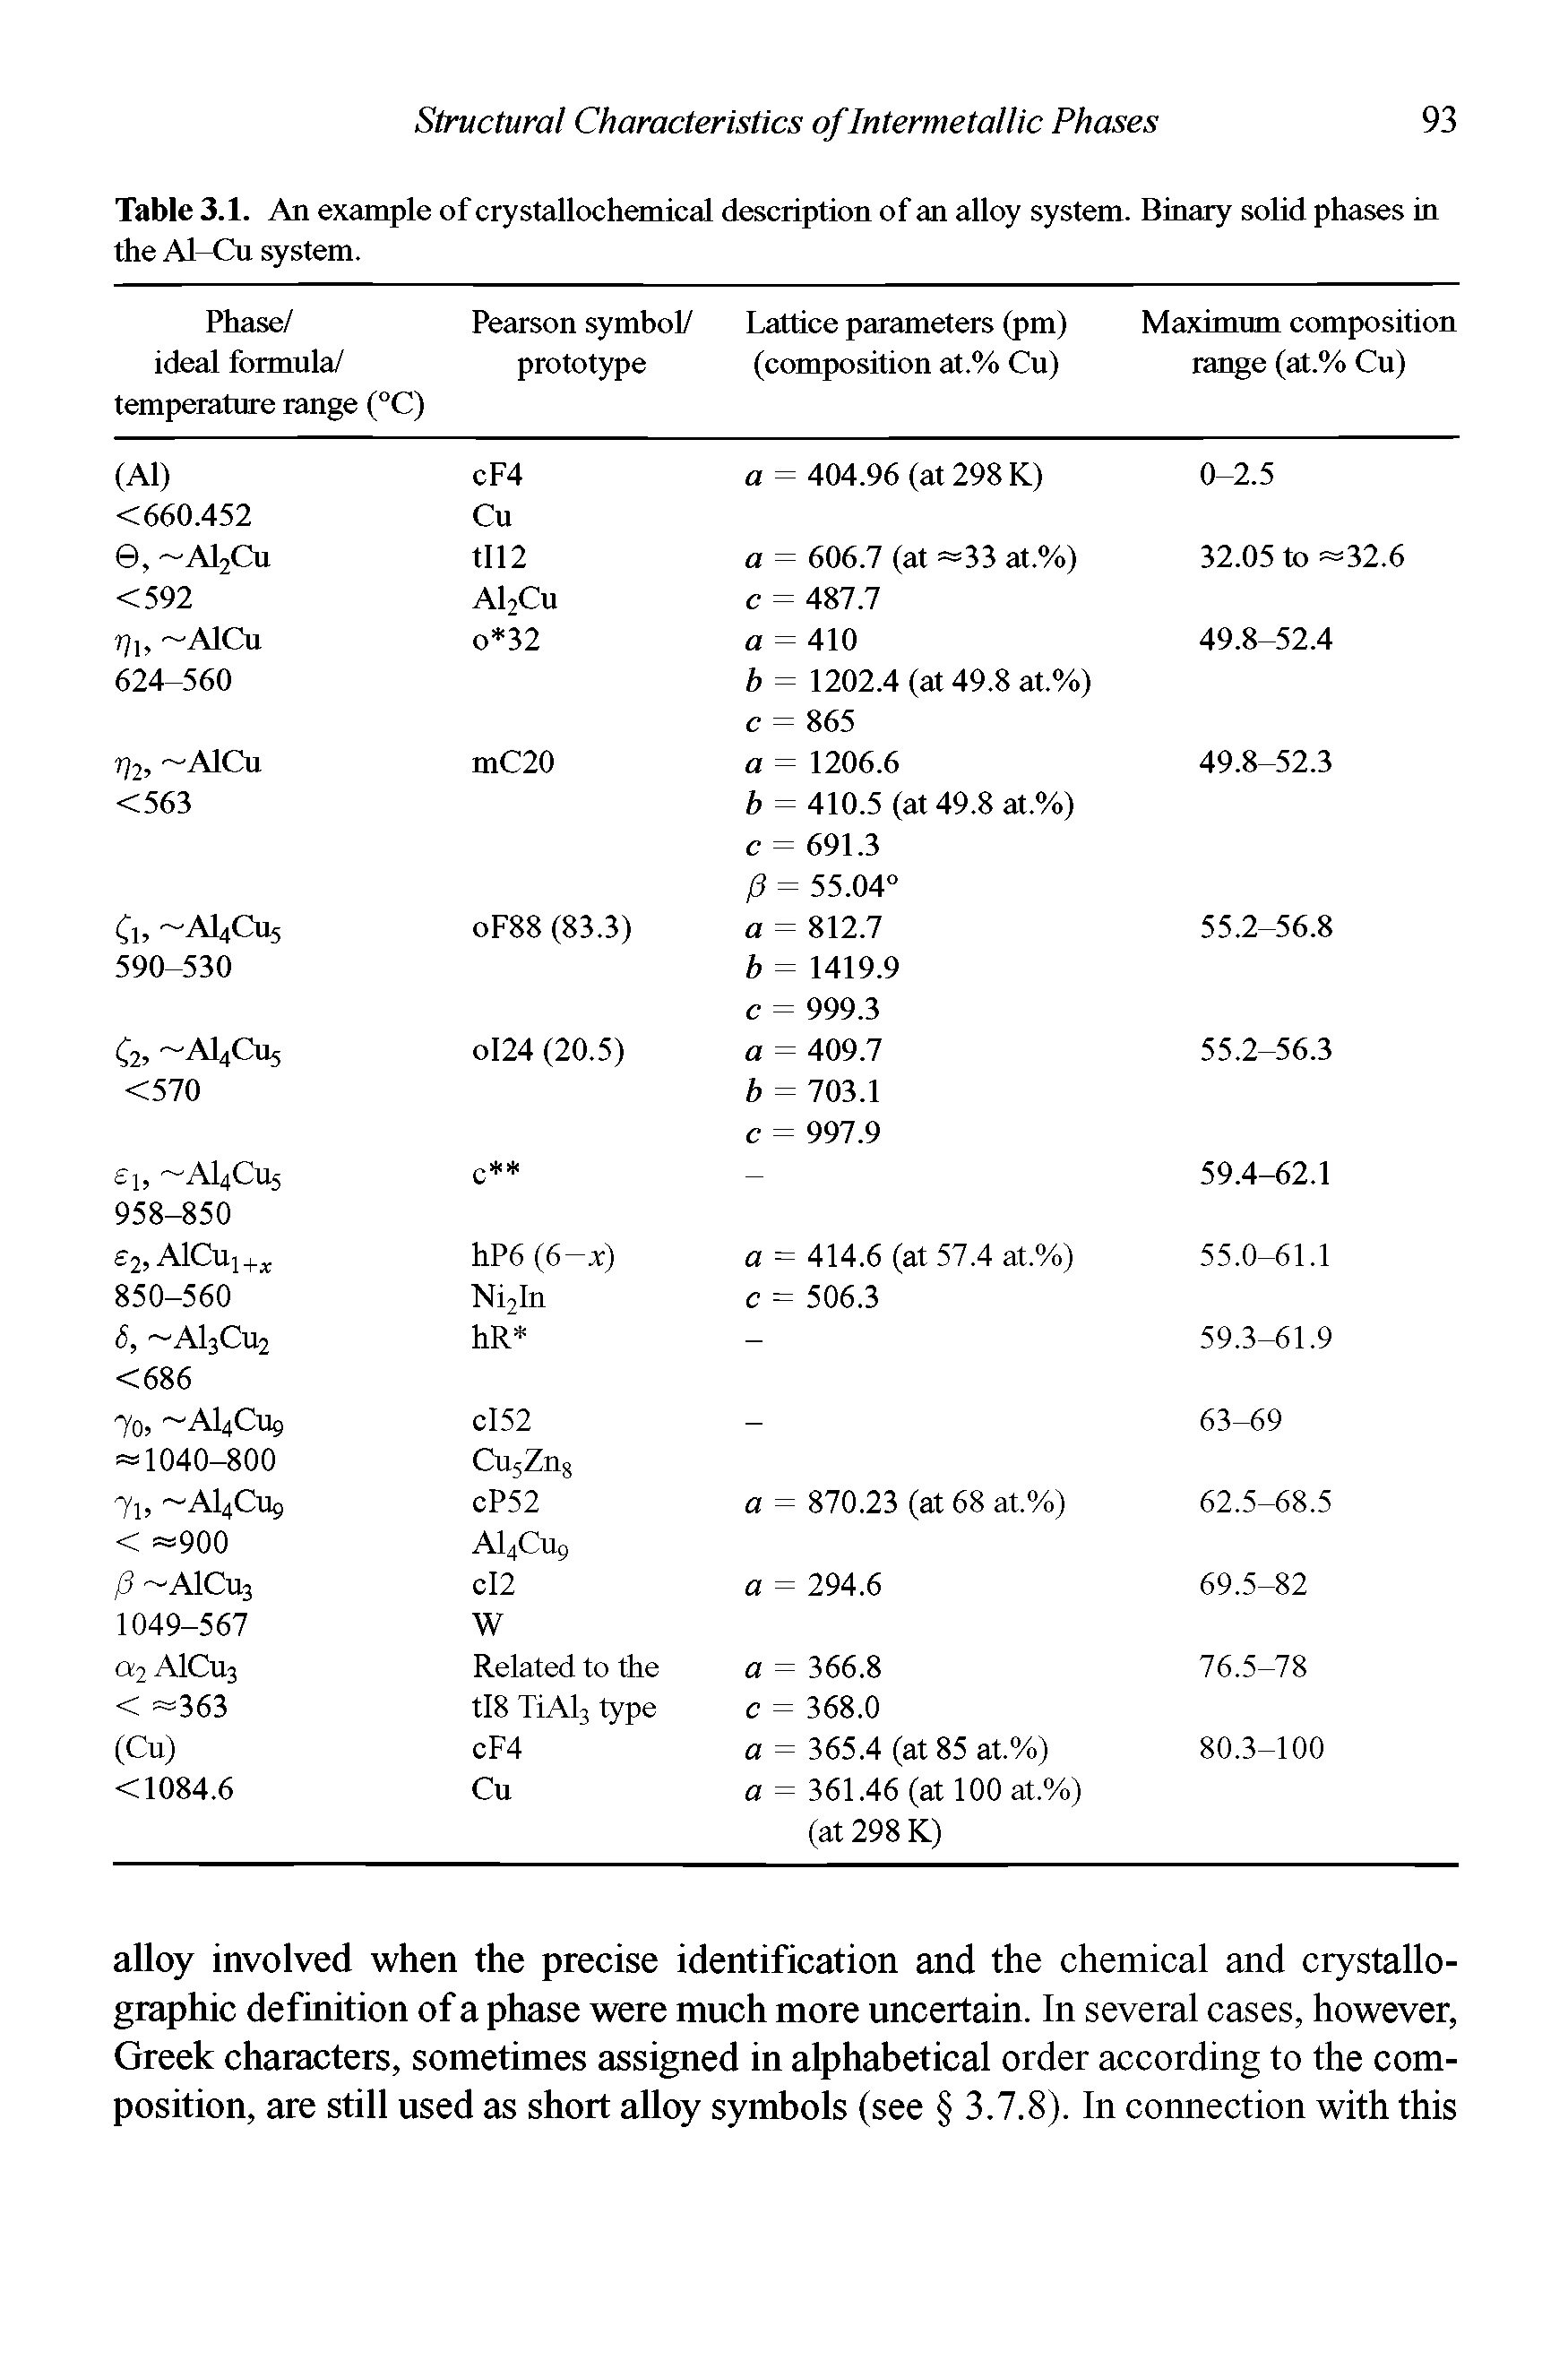 Table 3.1. An example of crystallochemical description of an alloy system. Binary solid phases in the Al-Cu system.